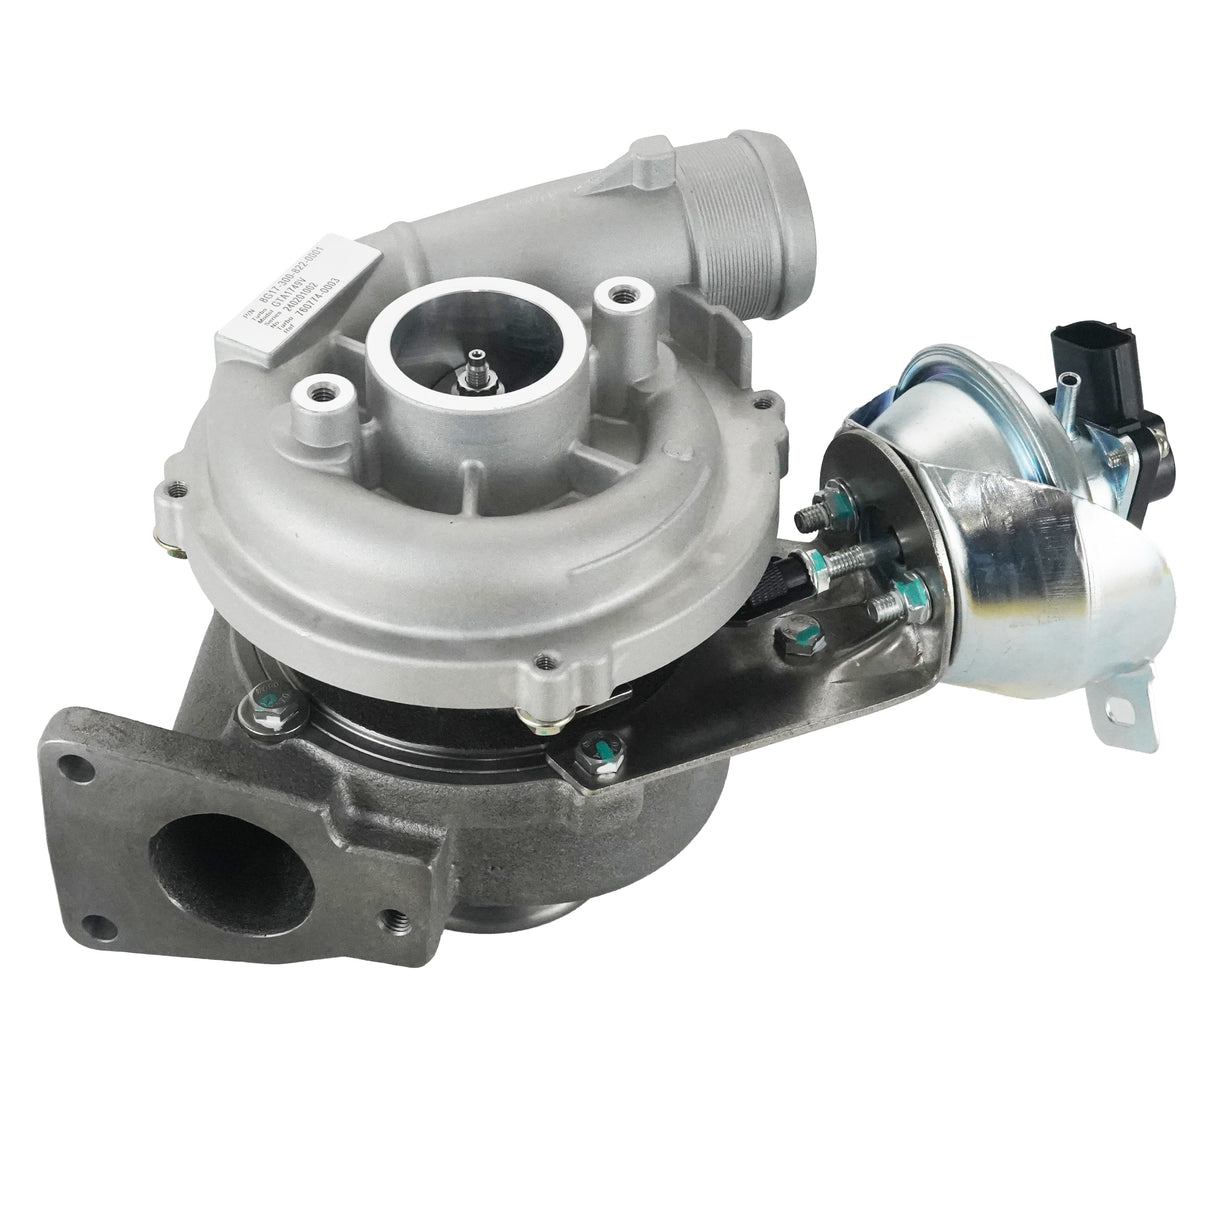 Volvo C30 | S40 | V50 turbo charger